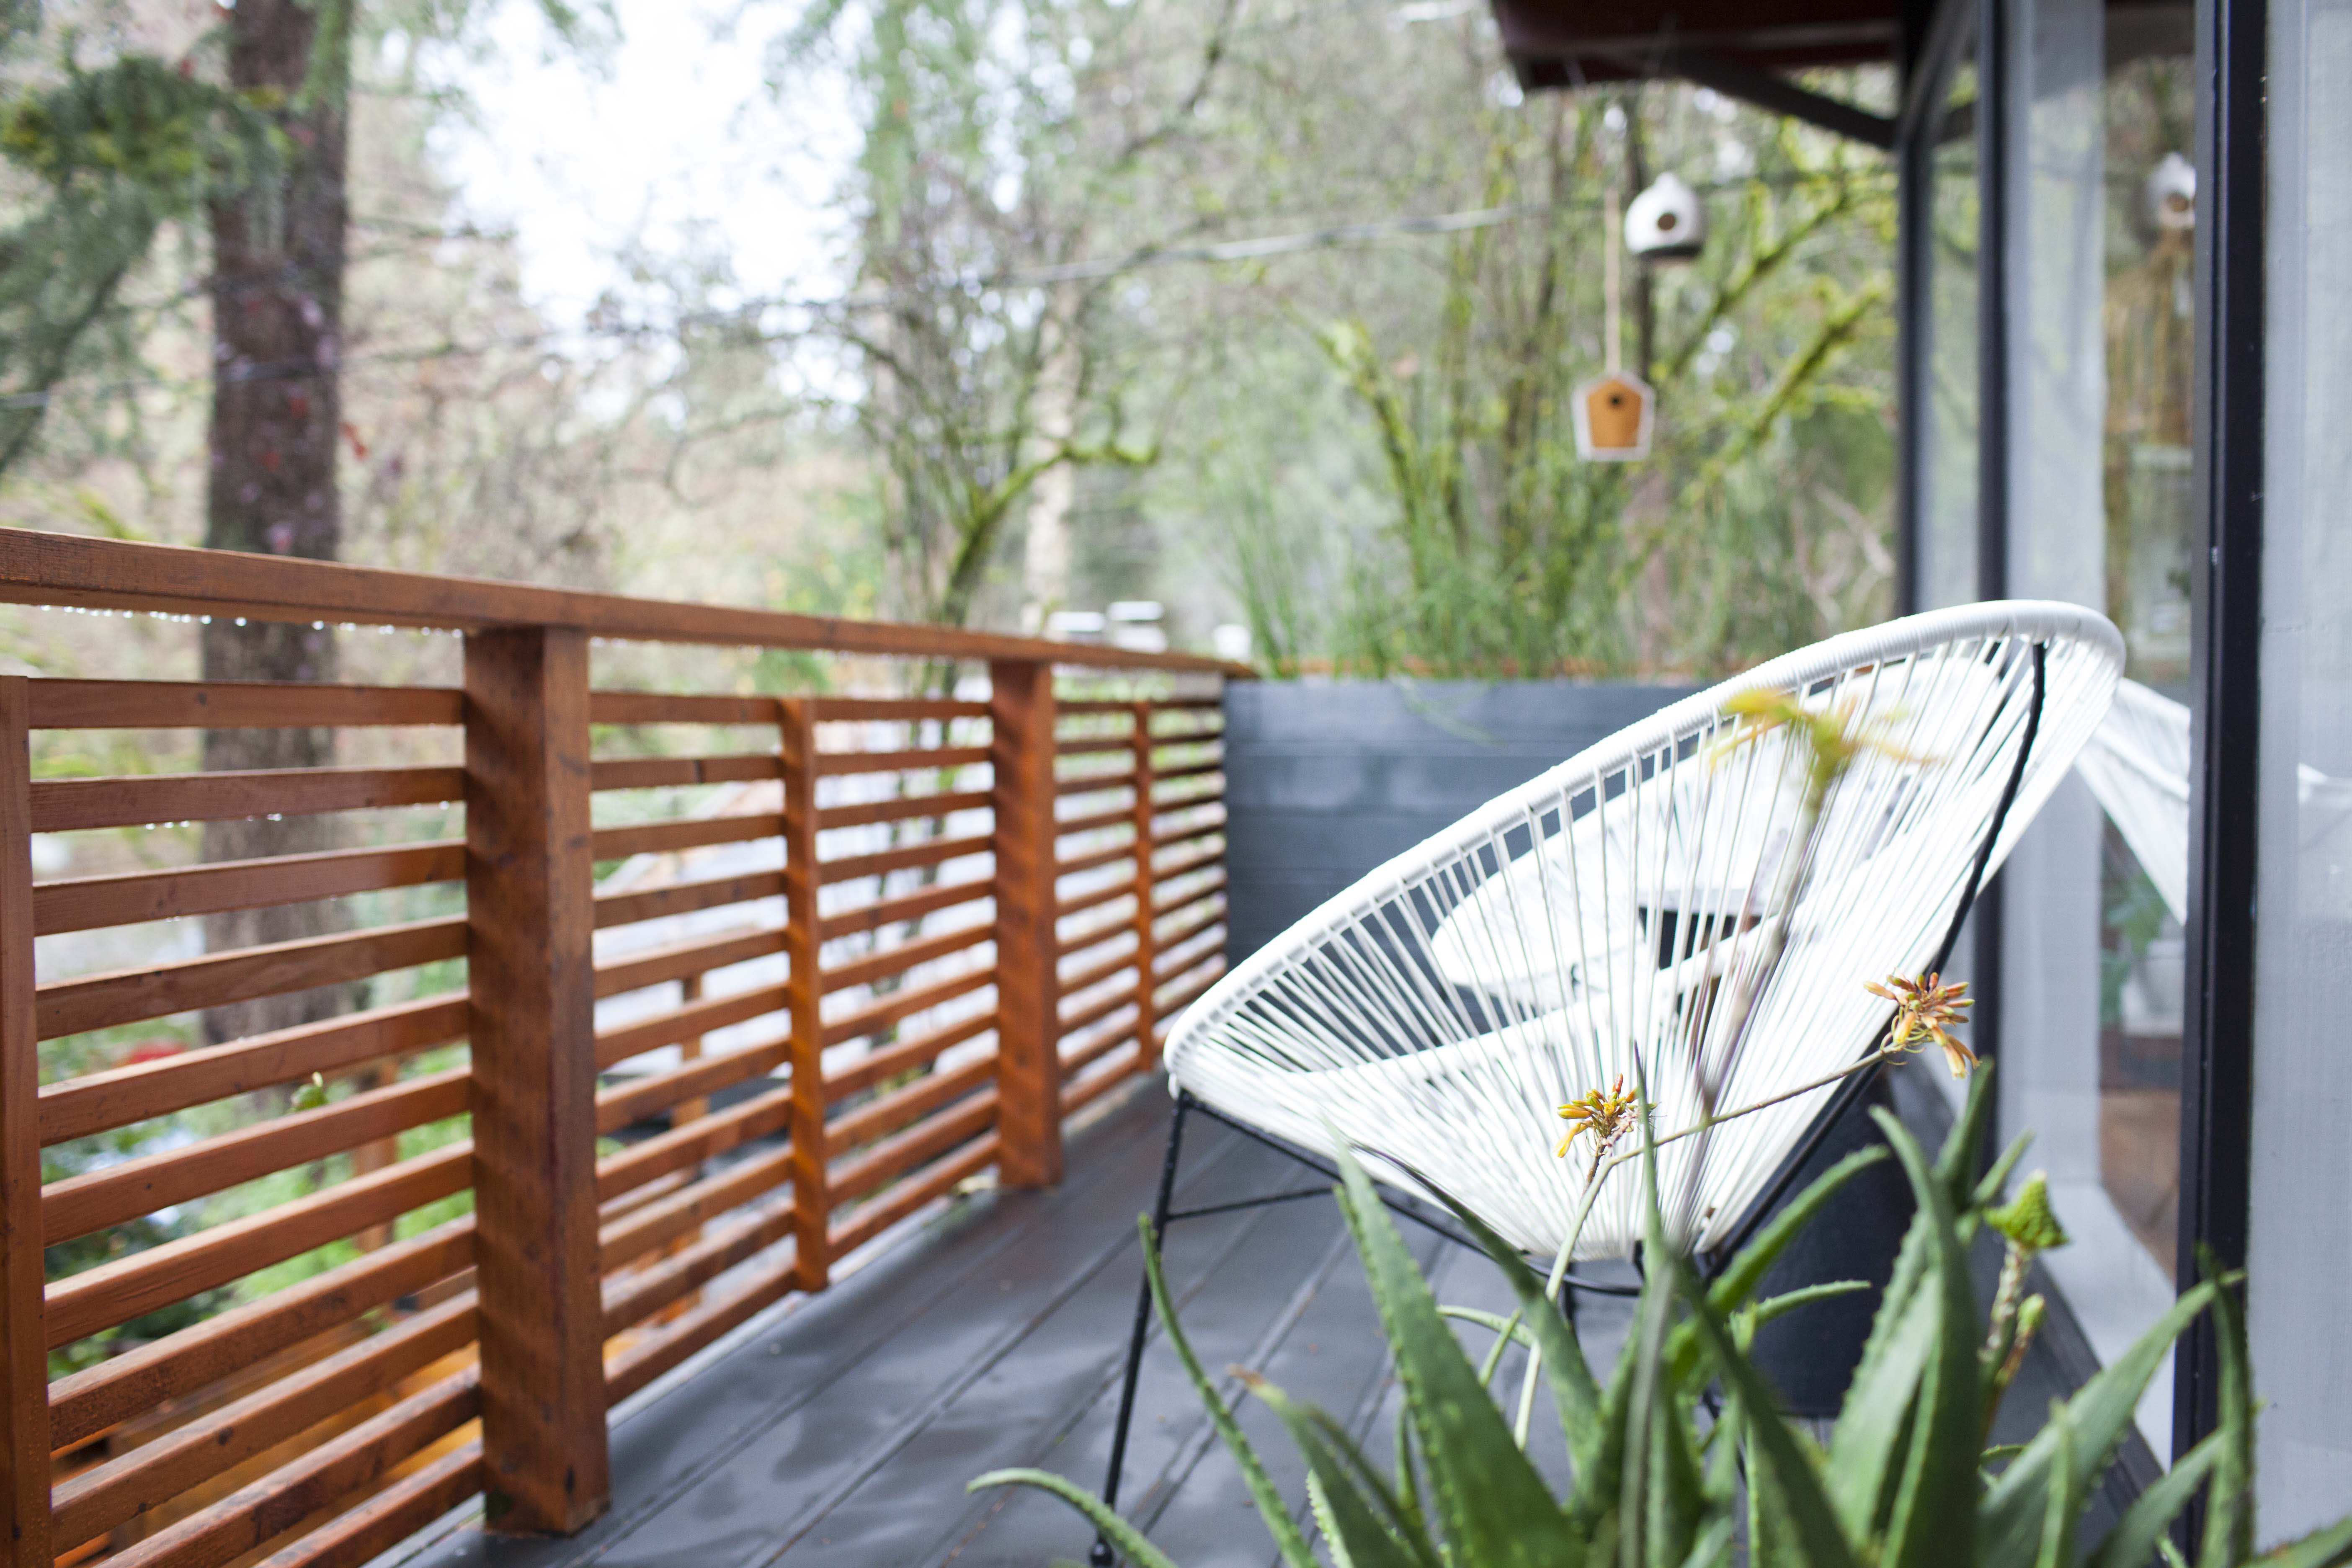 The Best Small-Space Patio Furniture